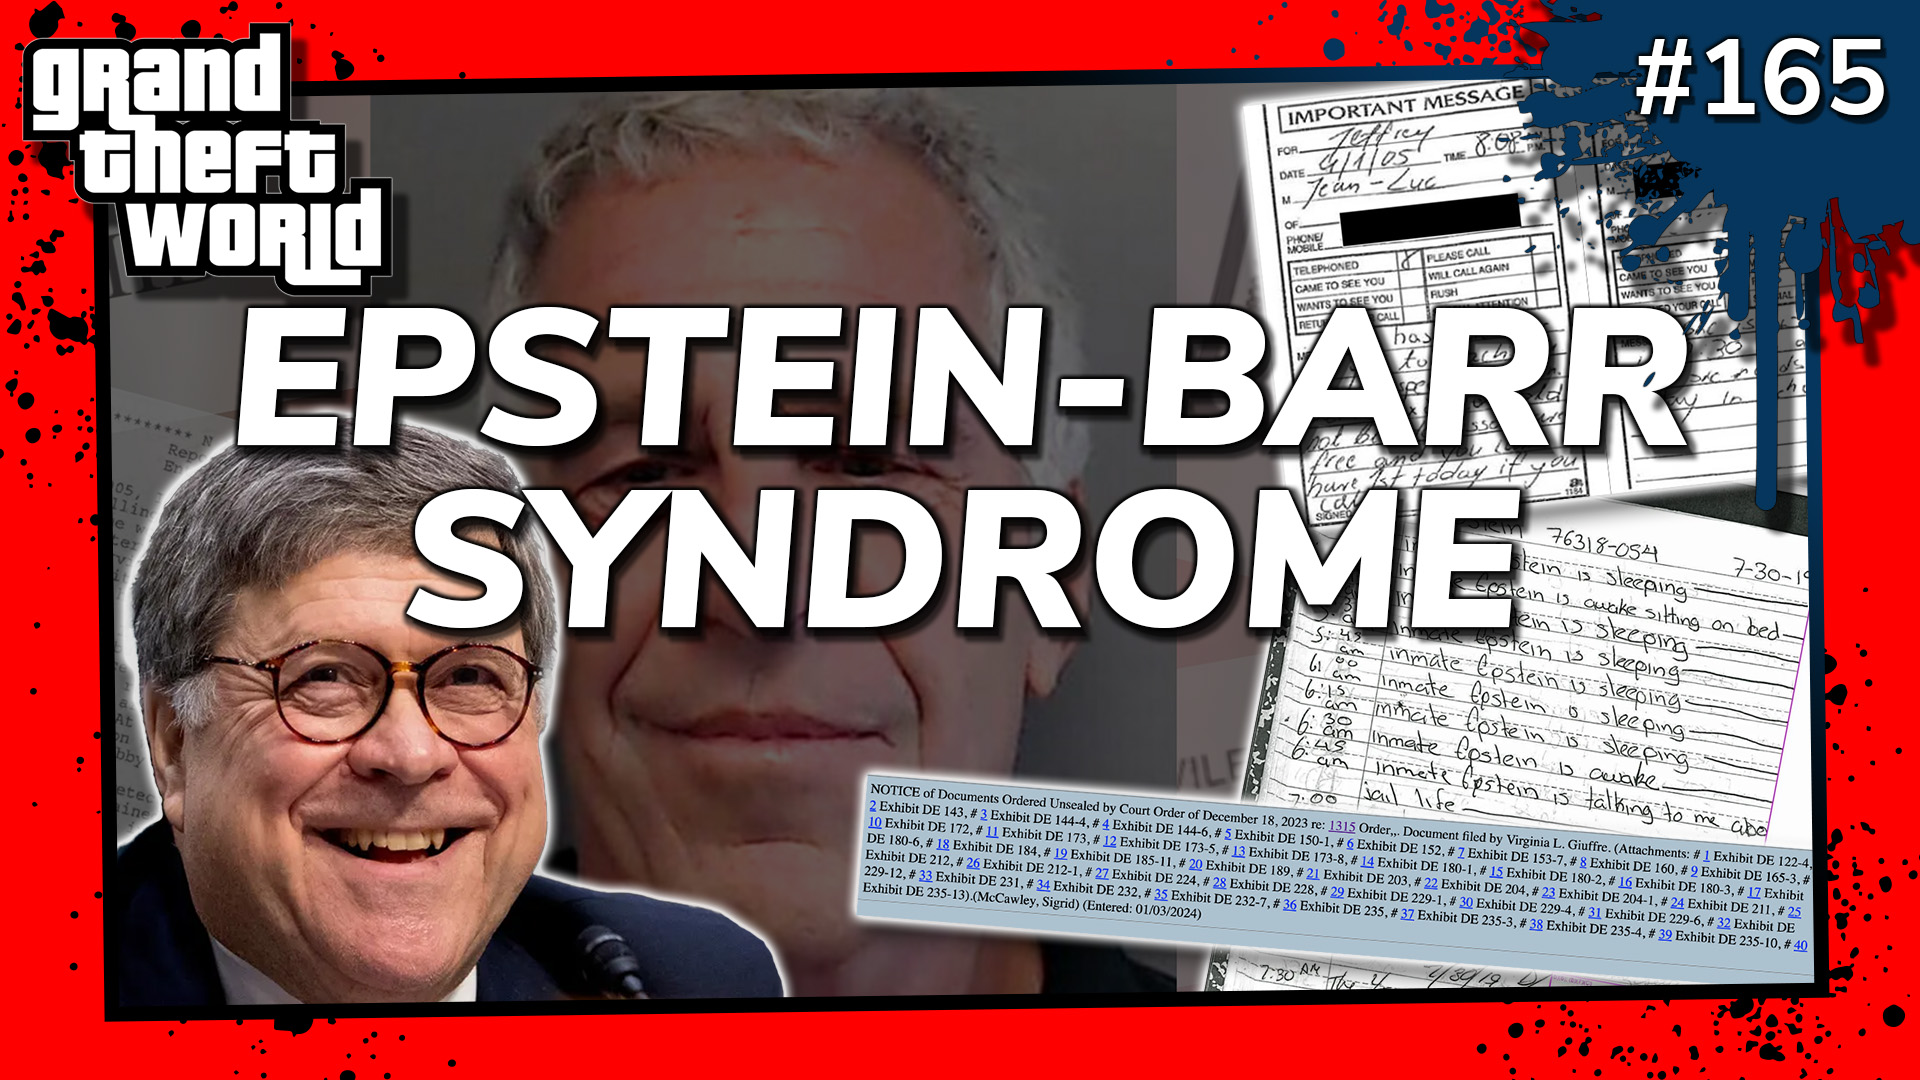 Grand Theft World Podcast 165 | EPSTEIN-BARR SYNDROME